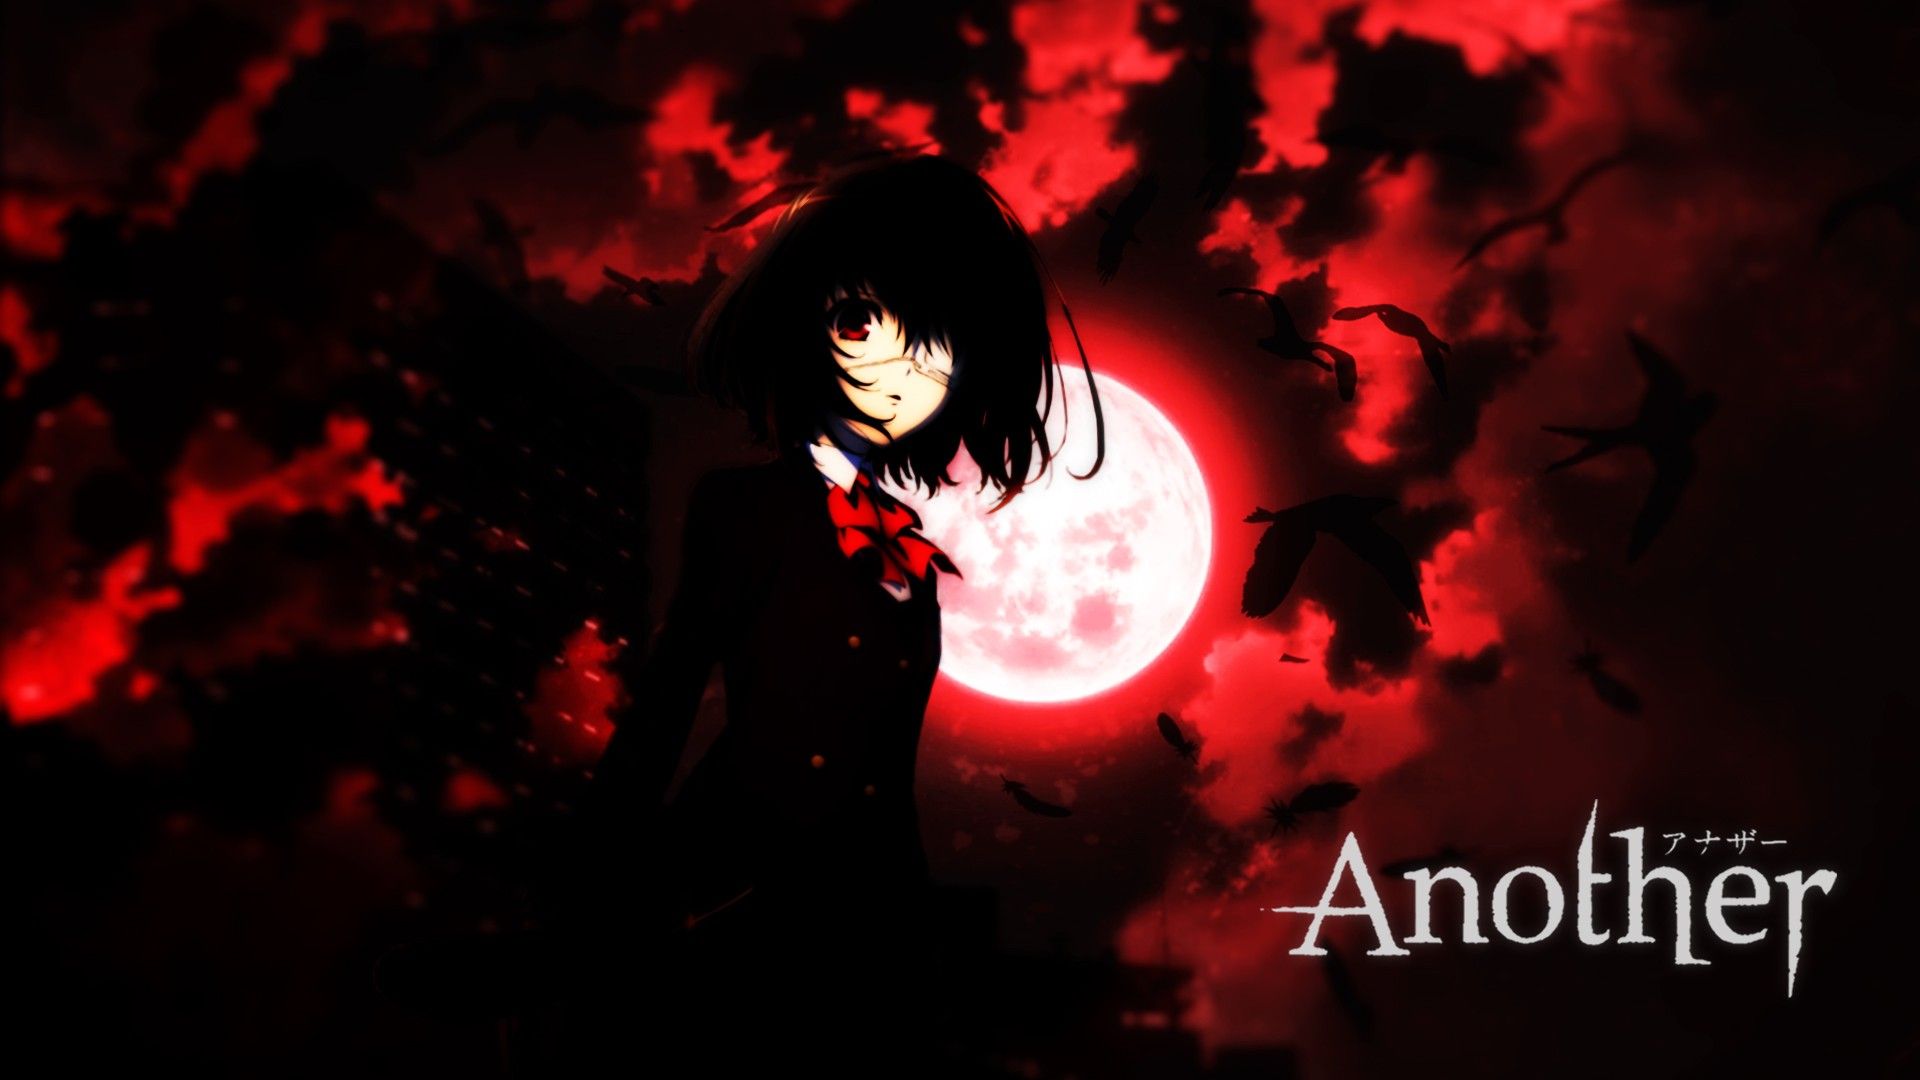 Photos Another Anime Desktop Wallpaper High Definition Monitor Download Free Amazing Background Photo Artwork 1920x1080